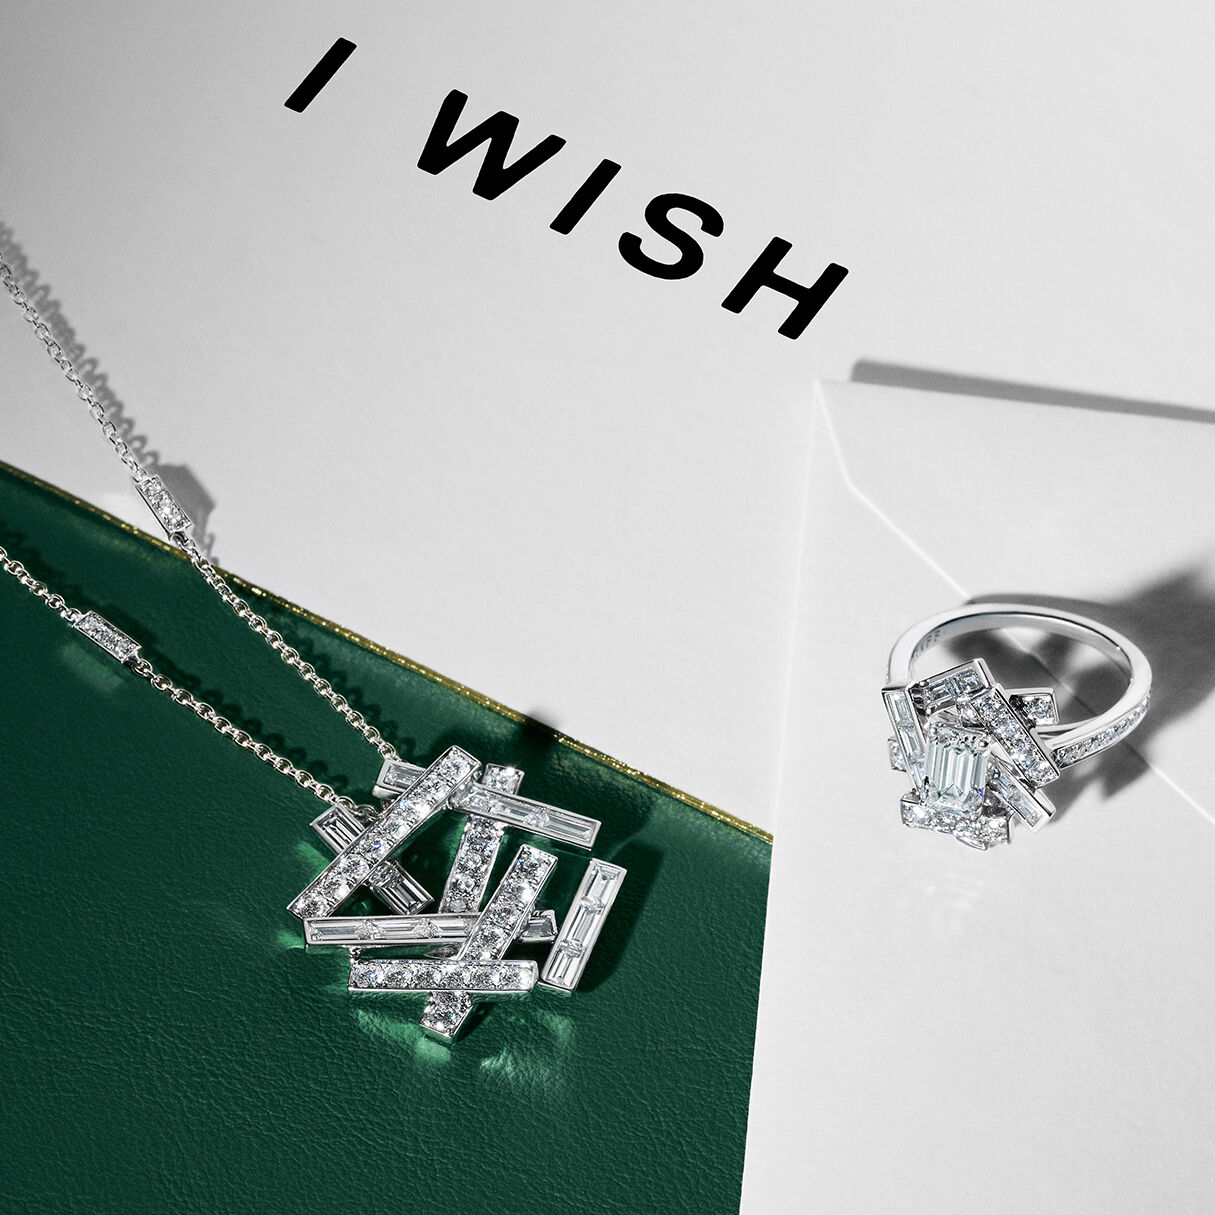 Still life image of Graff diamond collection Threads necklace and ring positioned on and 'I WISH' festive greetings card 